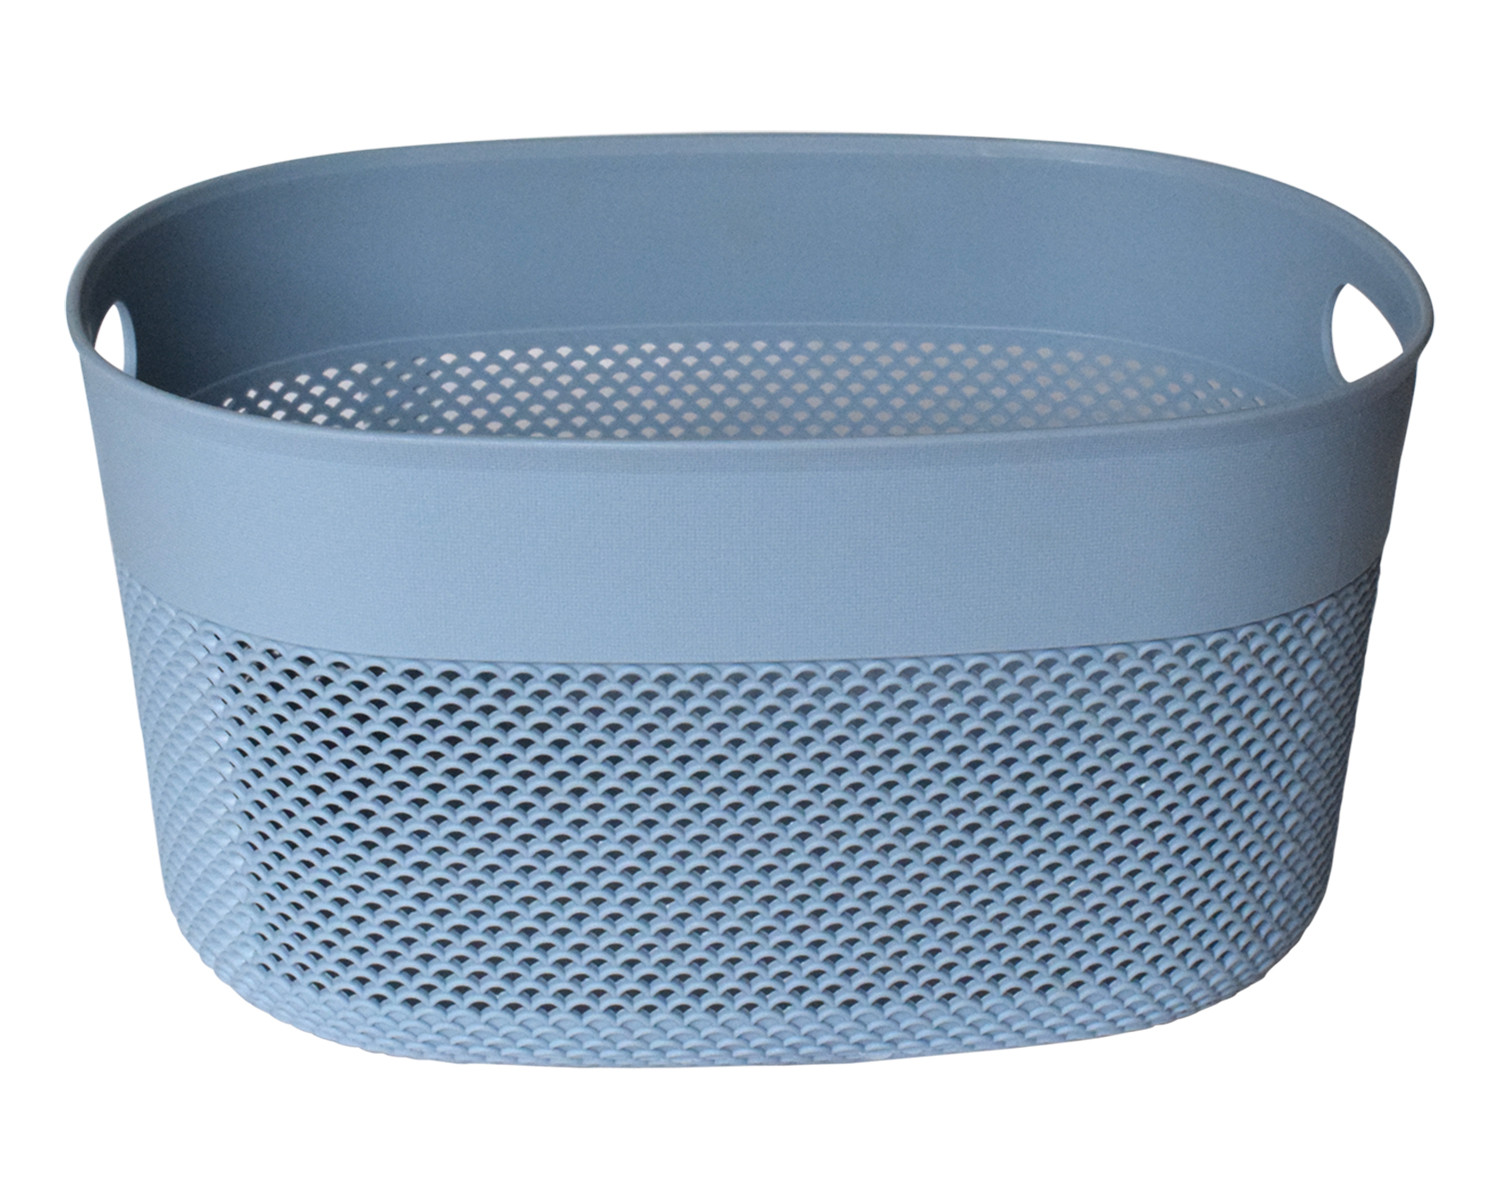 Kuber Industries Unbreakable Large Multipurpose Storage Baskets with lid|Design-Netted|Material-Plastic|Shape-Oval|Color-Sky Blue